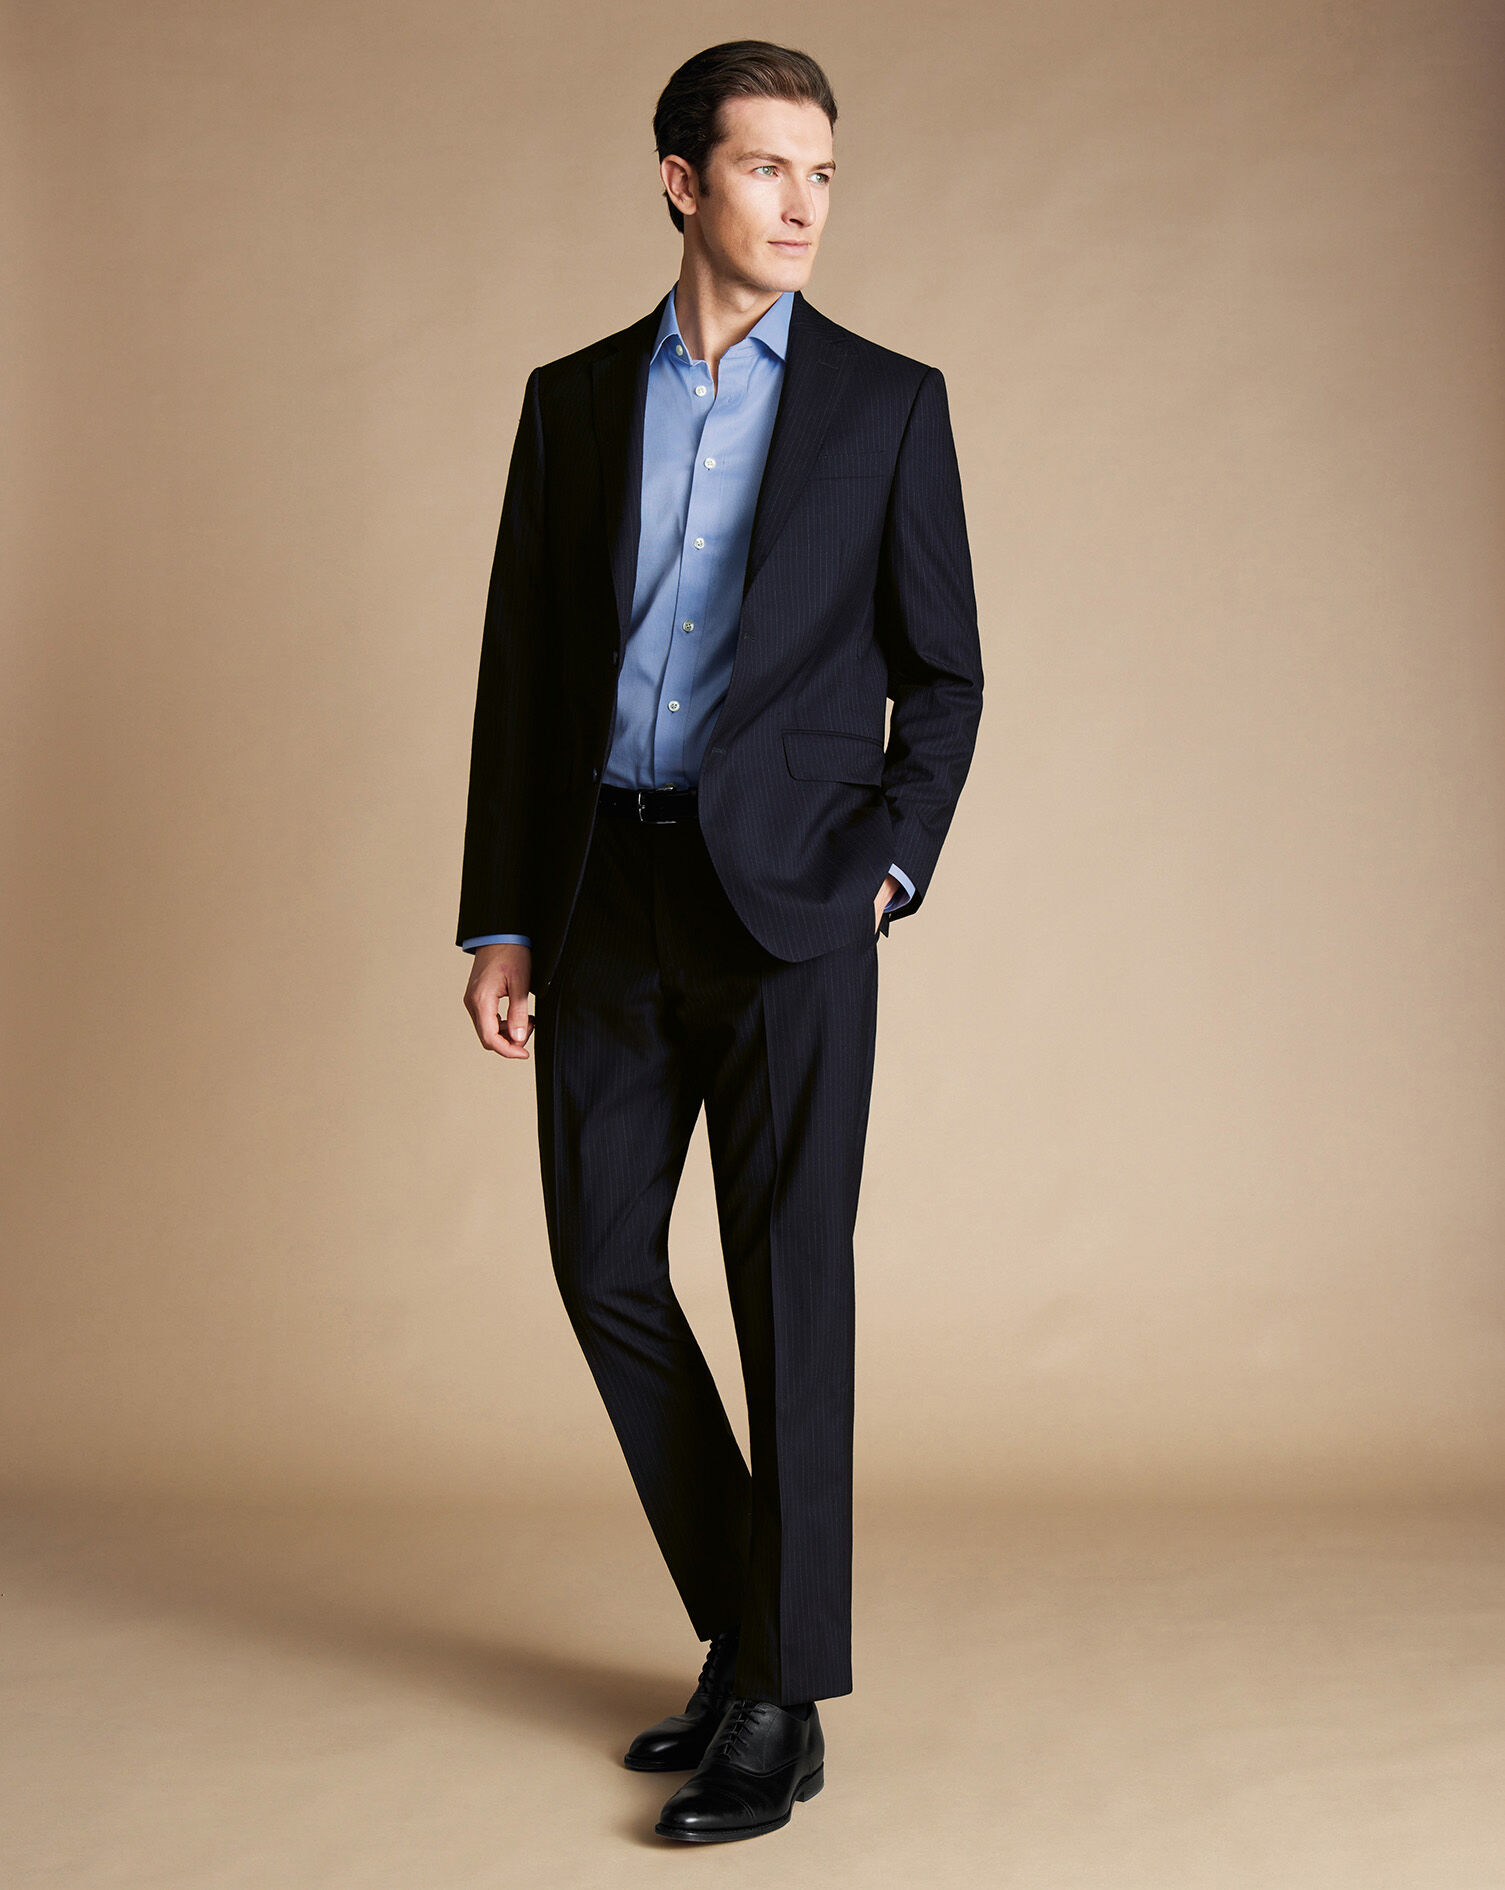 Navy Suit with a White Shirt and Black Tie | Blue suit men, Blue suit black  tie, Mens dark navy suit